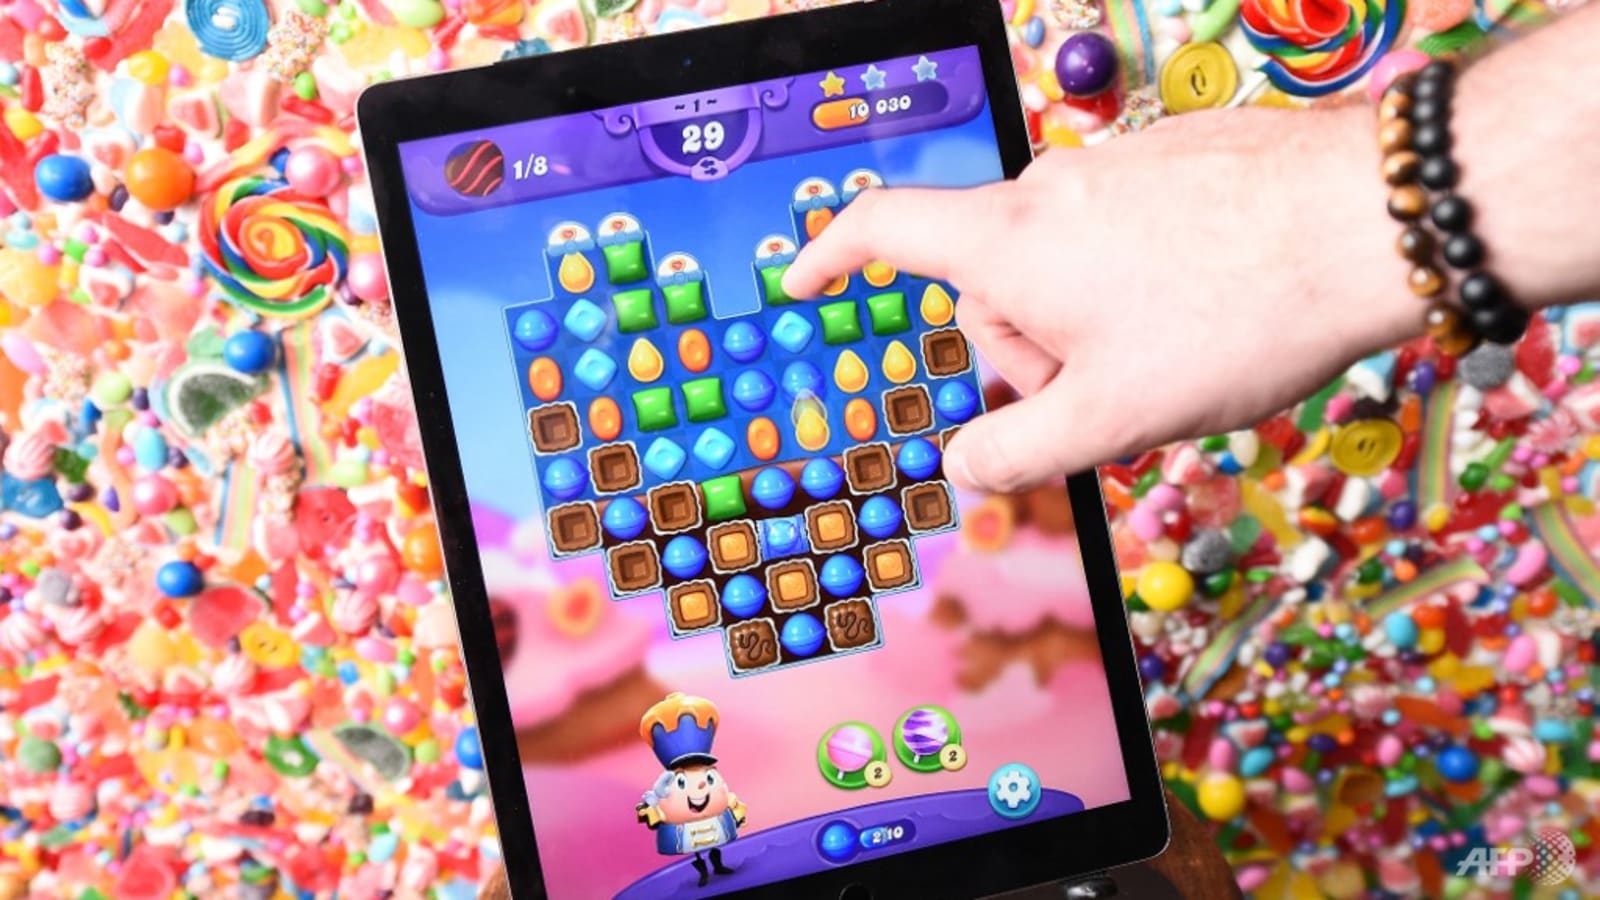 10-years-of-candy-crush:-why-isn’t-this-mobile-puzzle-game-getting-the-recognition-it-deserves?